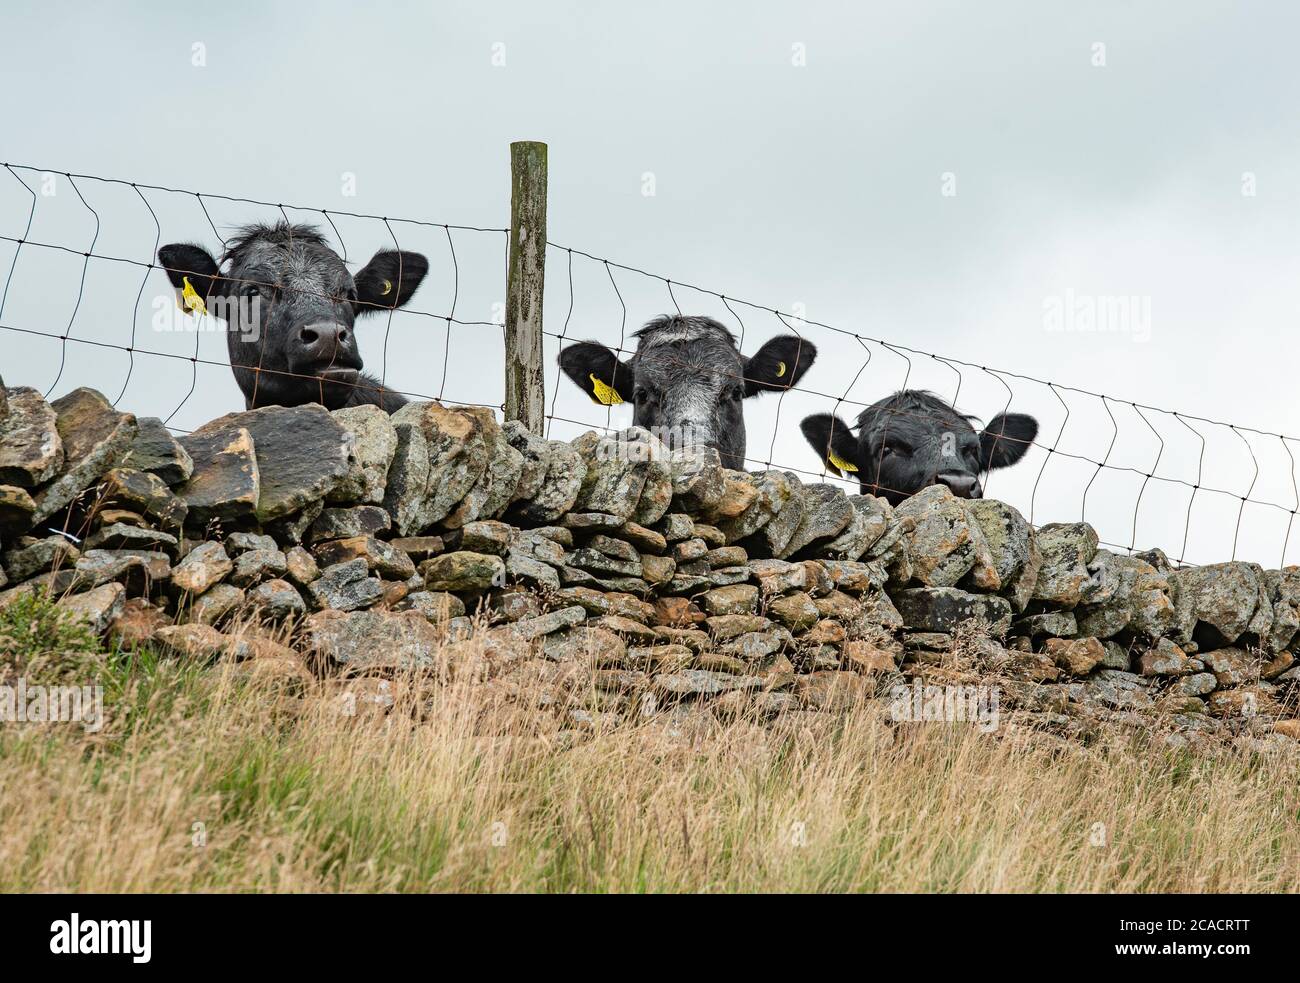 A beef heifers looking over a dry stone wall, Chapel-en-le-Frith, Derbyshire,UK Stock Photo